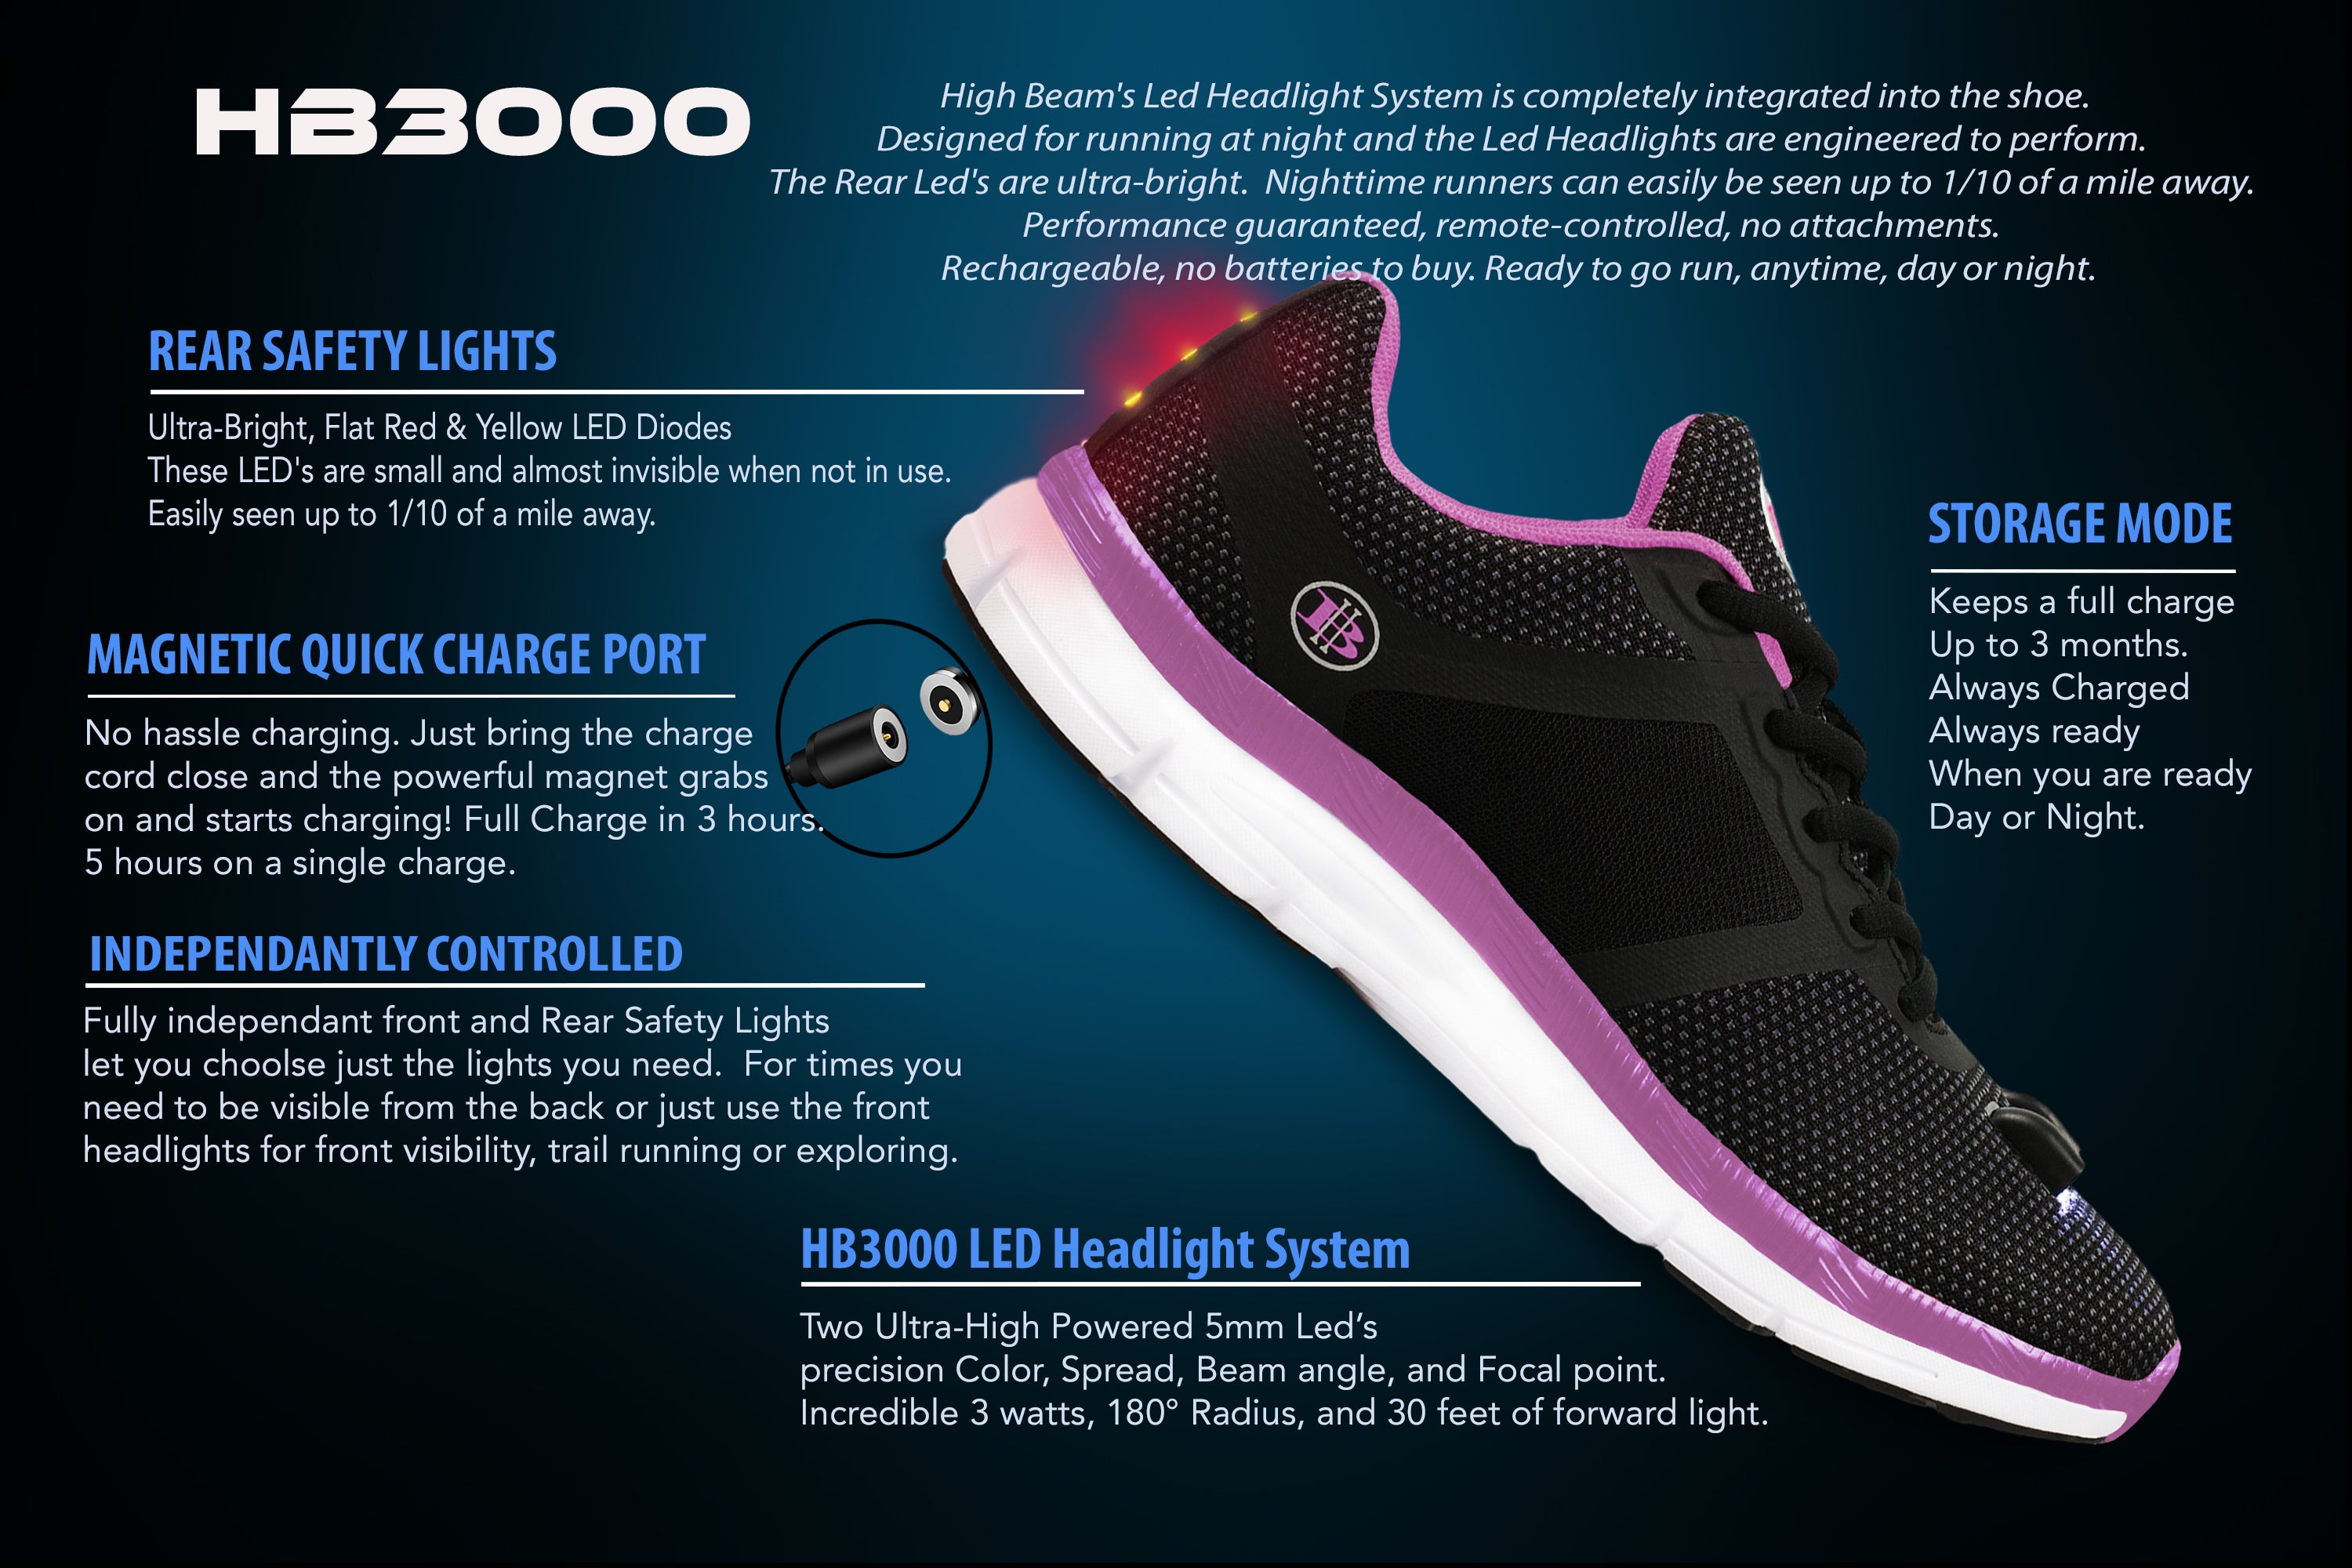 Women's Night Runner Shoes With Built-in Safety Lights - data_d88fe5ff-0a18-4ece-88a1-489e26768ec2